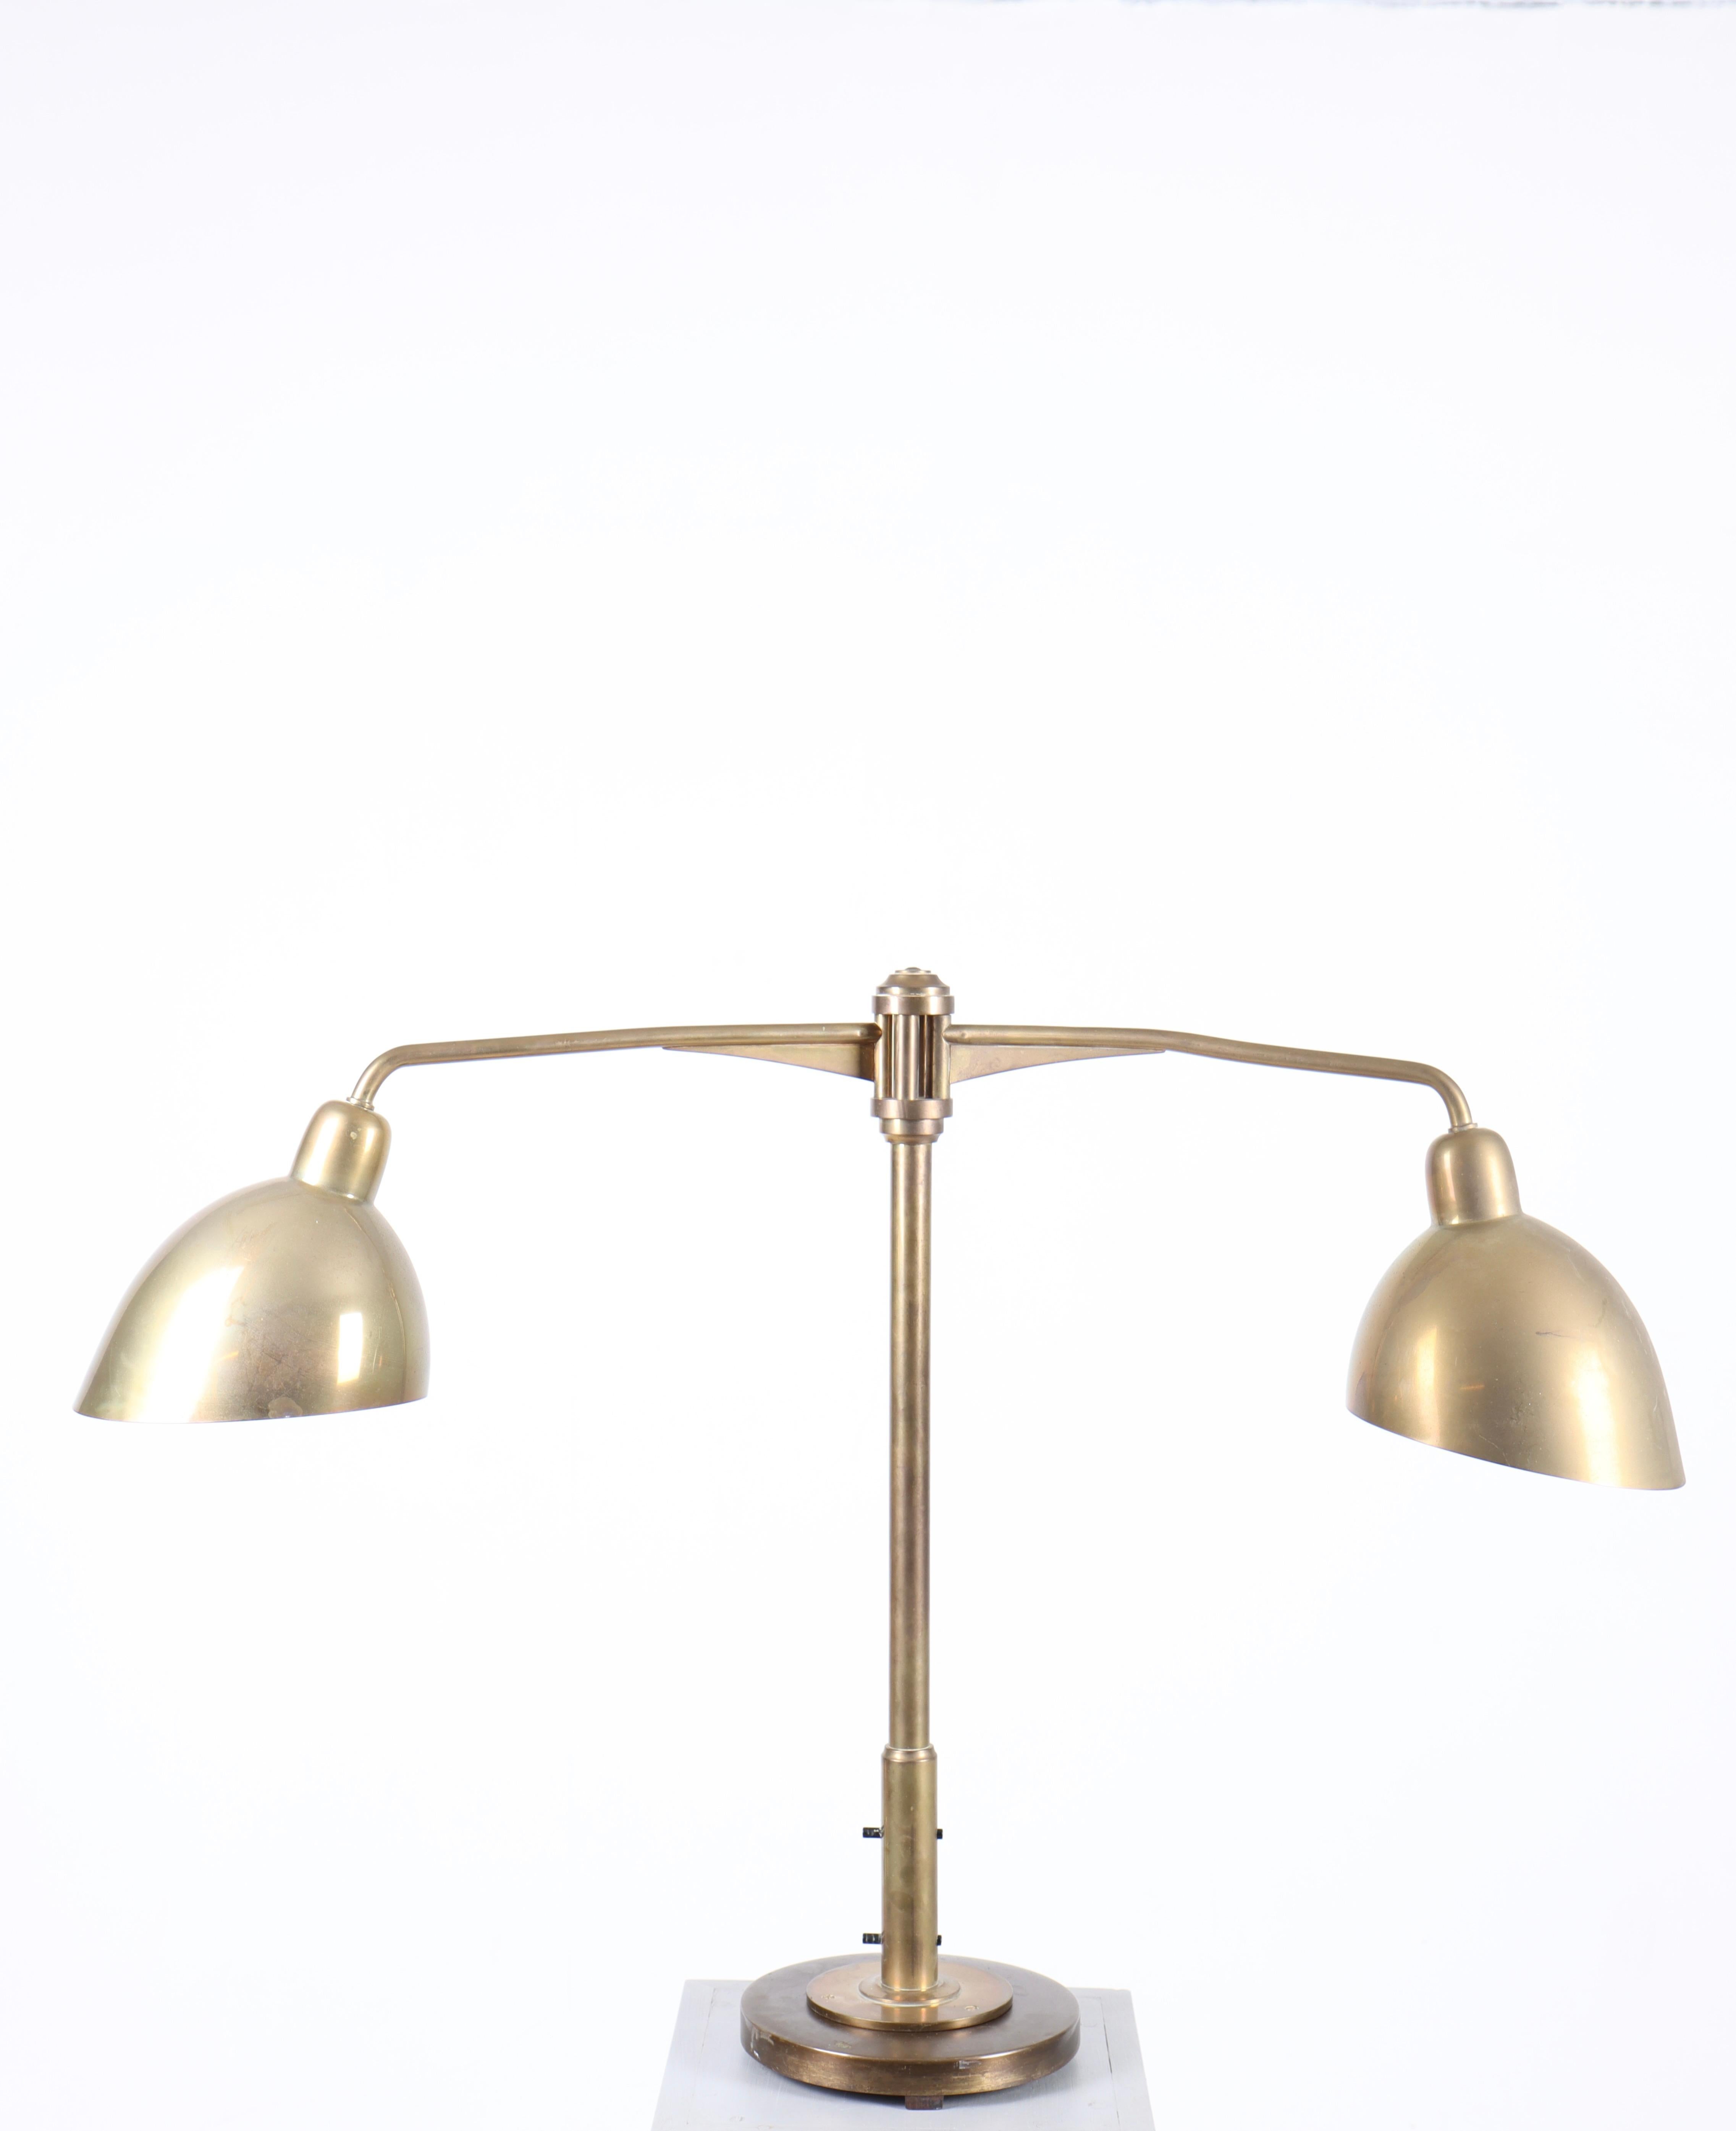 Decorative table lamp in brass designed and made by Louis Poulsen. Great original condition.